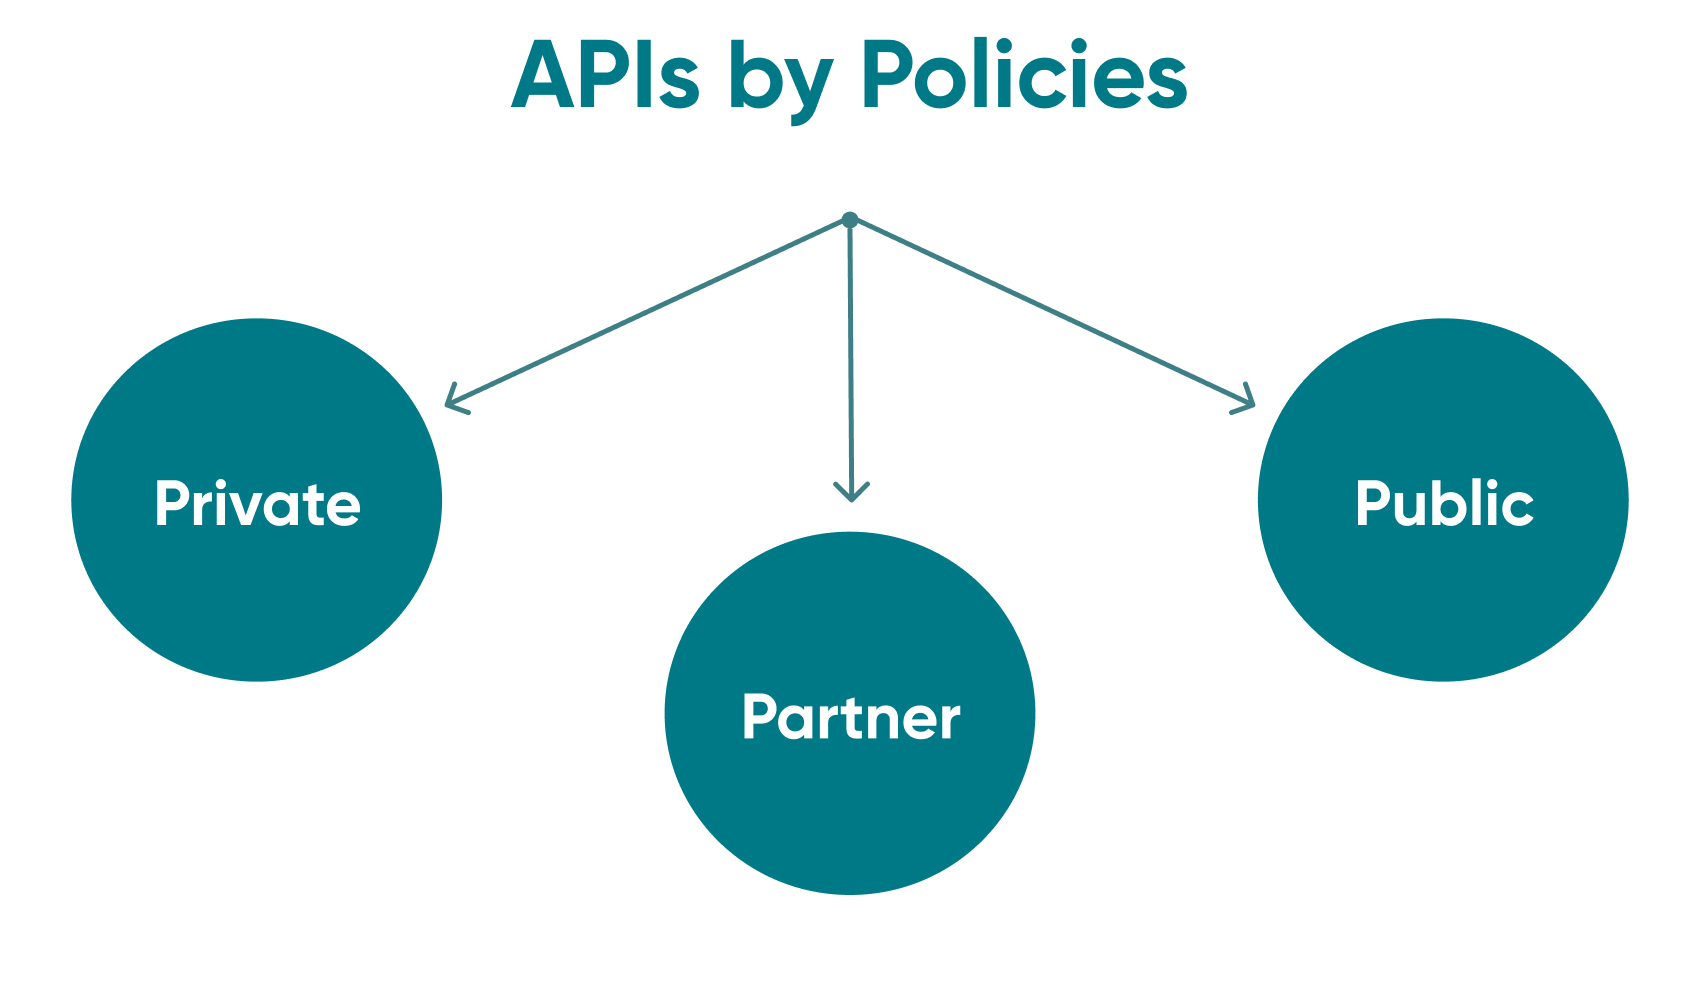 A diagram depicting the three main APIs by policies.